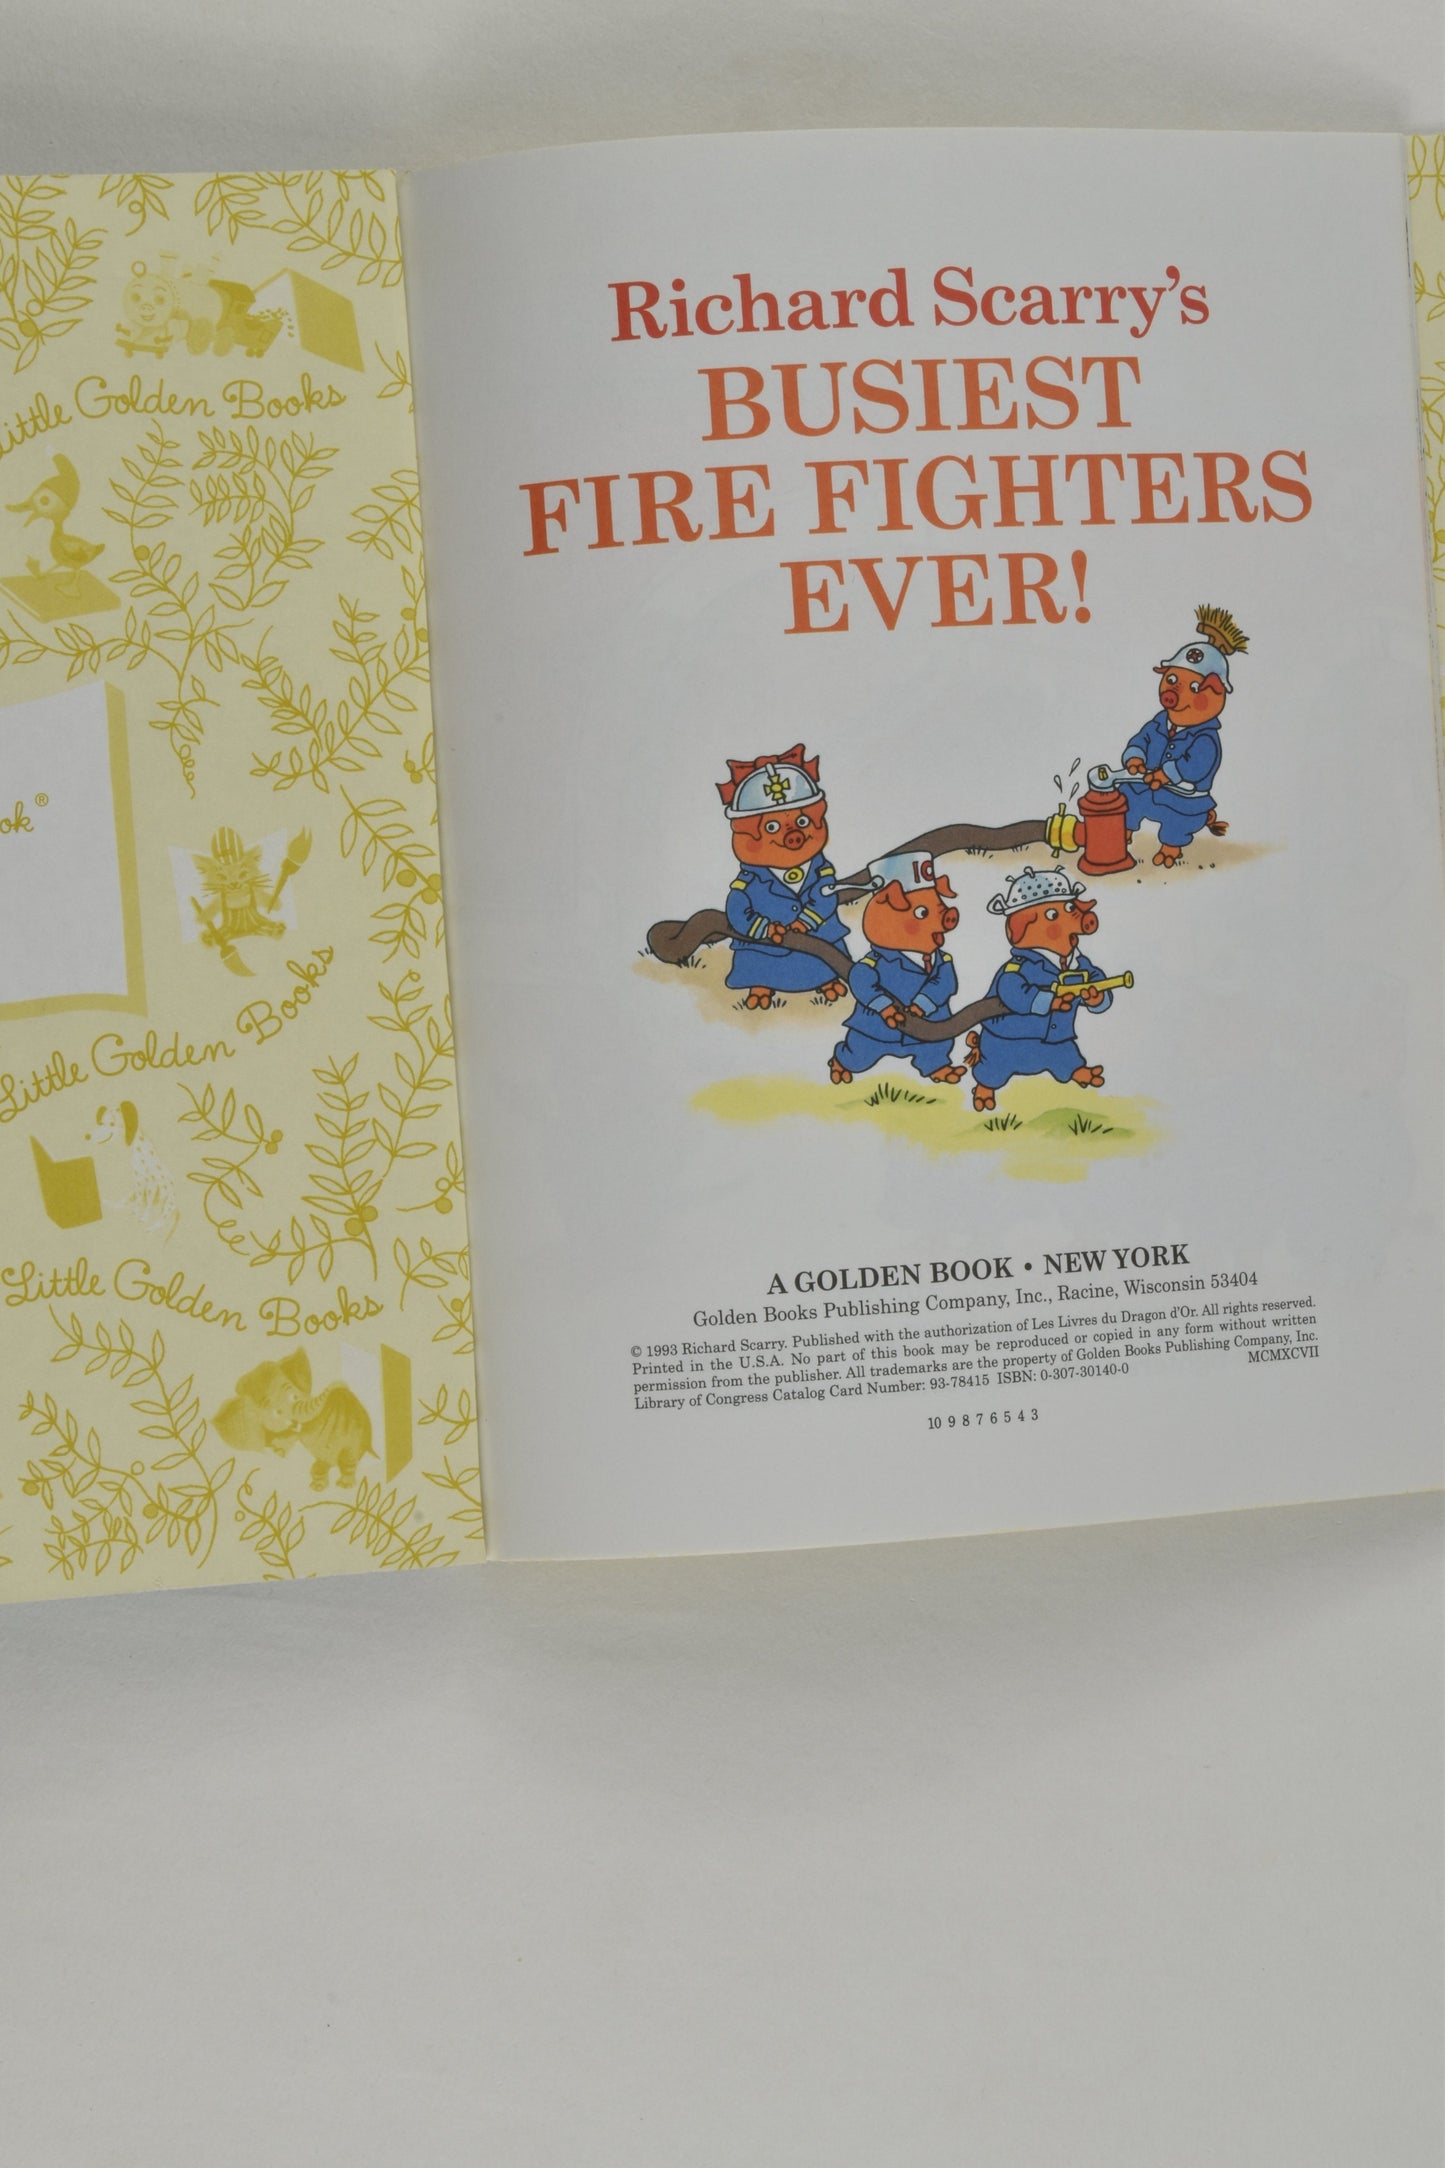 Little Golden Book Richard Scarry's 'Busiest Fire Fighters Ever'